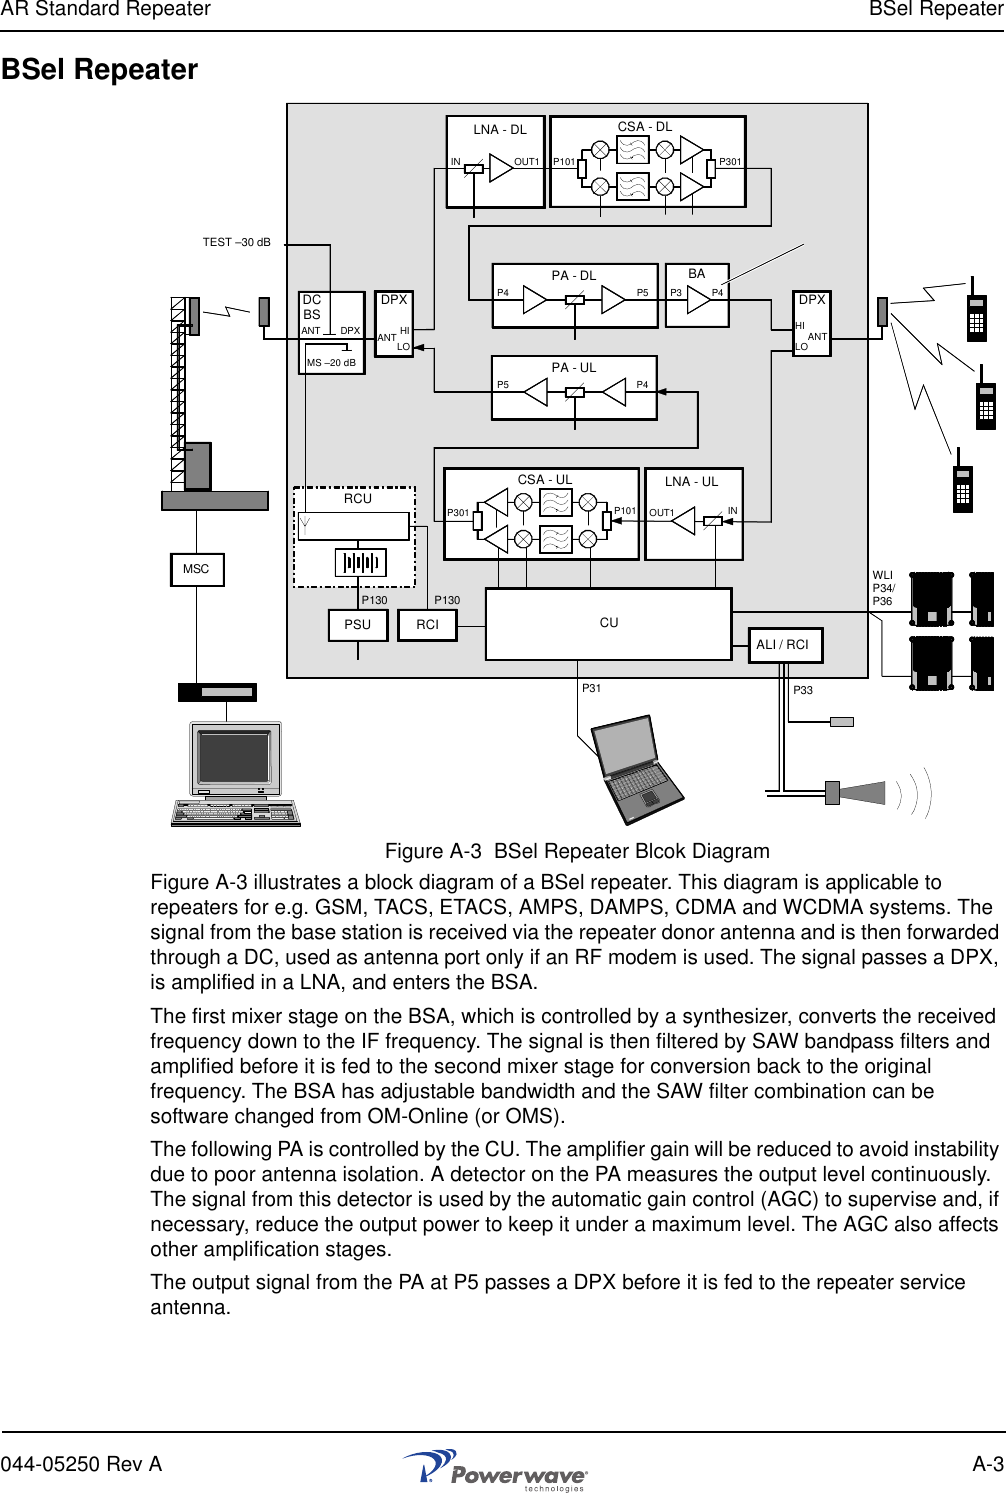 AR Standard Repeater BSel Repeater044-05250 Rev A A-3BSel RepeaterFigure A-3  BSel Repeater Blcok DiagramFigure A-3 illustrates a block diagram of a BSel repeater. This diagram is applicable to repeaters for e.g. GSM, TACS, ETACS, AMPS, DAMPS, CDMA and WCDMA systems. The signal from the base station is received via the repeater donor antenna and is then forwarded through a DC, used as antenna port only if an RF modem is used. The signal passes a DPX, is amplified in a LNA, and enters the BSA.The first mixer stage on the BSA, which is controlled by a synthesizer, converts the received frequency down to the IF frequency. The signal is then filtered by SAW bandpass filters and amplified before it is fed to the second mixer stage for conversion back to the original frequency. The BSA has adjustable bandwidth and the SAW filter combination can be software changed from OM-Online (or OMS).The following PA is controlled by the CU. The amplifier gain will be reduced to avoid instability due to poor antenna isolation. A detector on the PA measures the output level continuously. The signal from this detector is used by the automatic gain control (AGC) to supervise and, if necessary, reduce the output power to keep it under a maximum level. The AGC also affects other amplification stages.The output signal from the PA at P5 passes a DPX before it is fed to the repeater service antenna.MS –20dBDCBSP130P31 P33TEST –30 dBPA - DLLNA - DLPA - ULLNA - ULCSA - DLDPXCSA - ULALI / RCIP130DPXBAANT DPX HILOANT ANTHILOIN OUT1 P101 P301P4 P5 P3 P4INOUT1P101P301P4P5MS –20 dBRCURCIPSUMSC WLIP34/P36CU